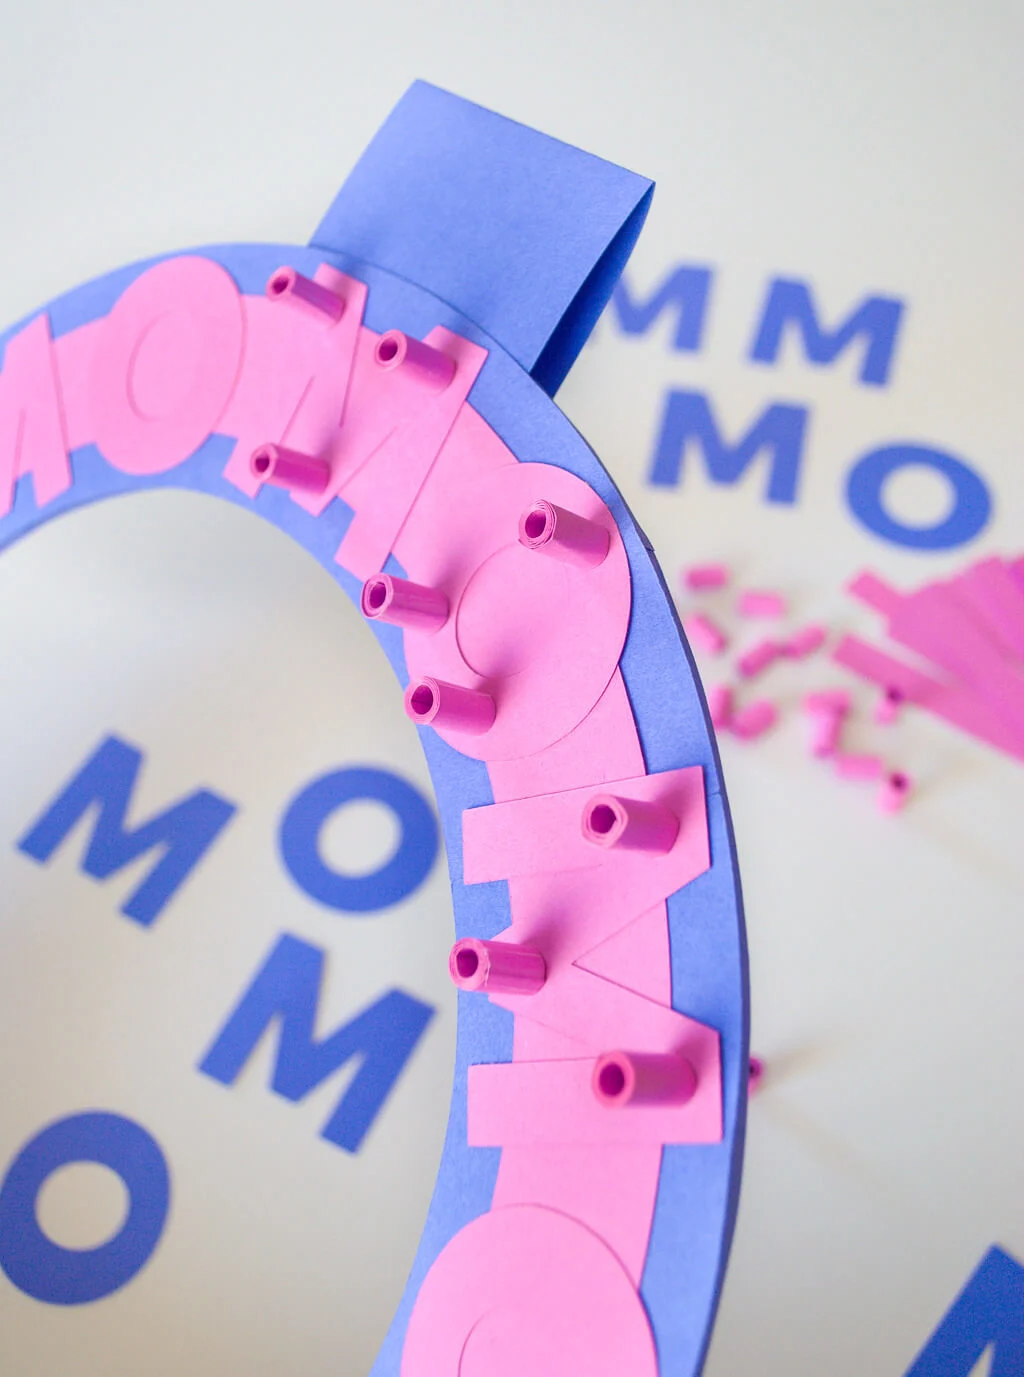 How to make a 3D paper wreath